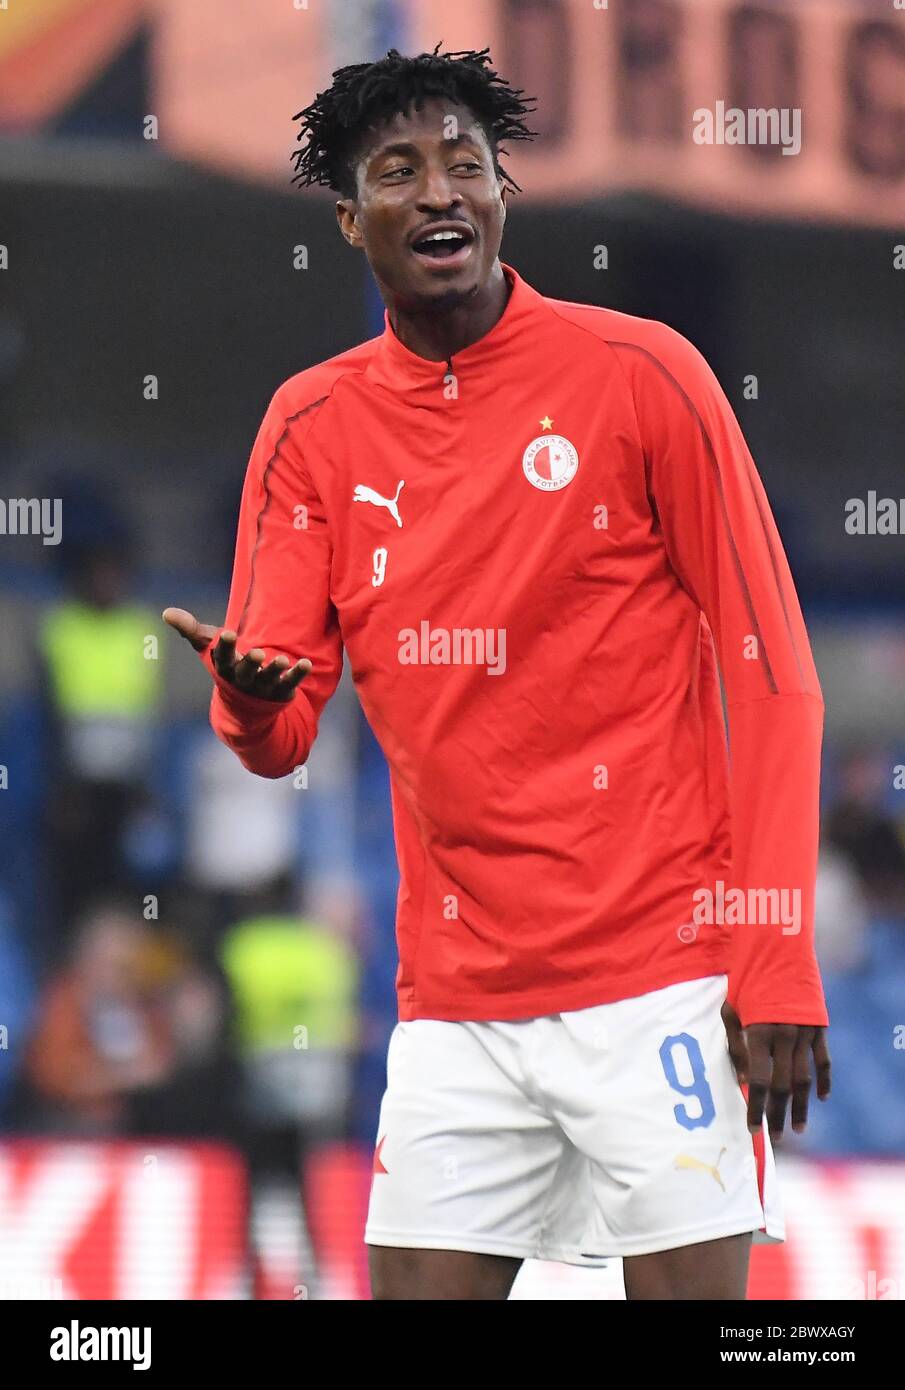 LONDON, ENGLAND - APRIL 18, 2019: Peter Olayinka of Slavia pictured prior to the second leg of the 2018/19 UEFA Europa League Quarter-Finals game between Chelsea FC (England) and SK Slavia Praha (Czech Republic) at Stamford Bridge. Stock Photo